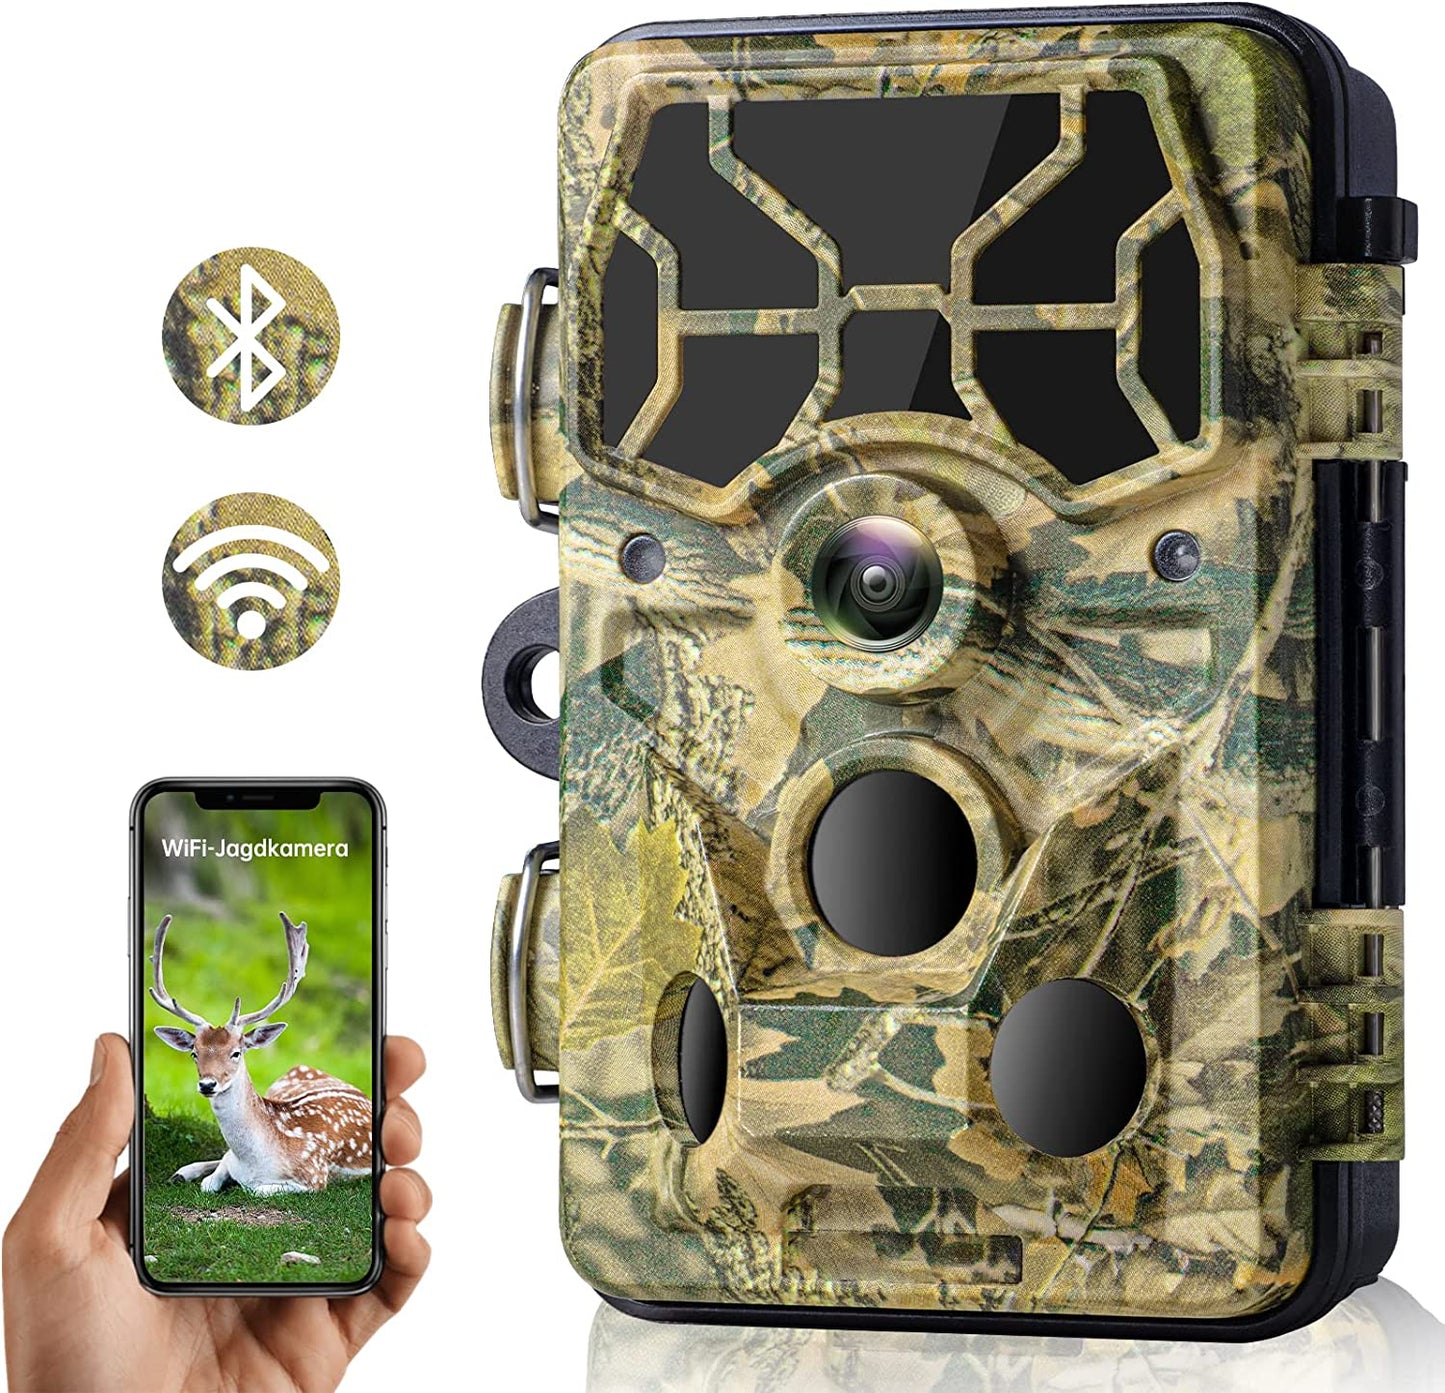 CAMPARK WiFi Bluetooth Trail Camera 30MP 1296P Deer Game Camera Night Vision Motion Activated 3 PIR LEDs 120°Wide Lens Hunting Wildlife Camera Waterproof IP66 Hunting Trail Monitors